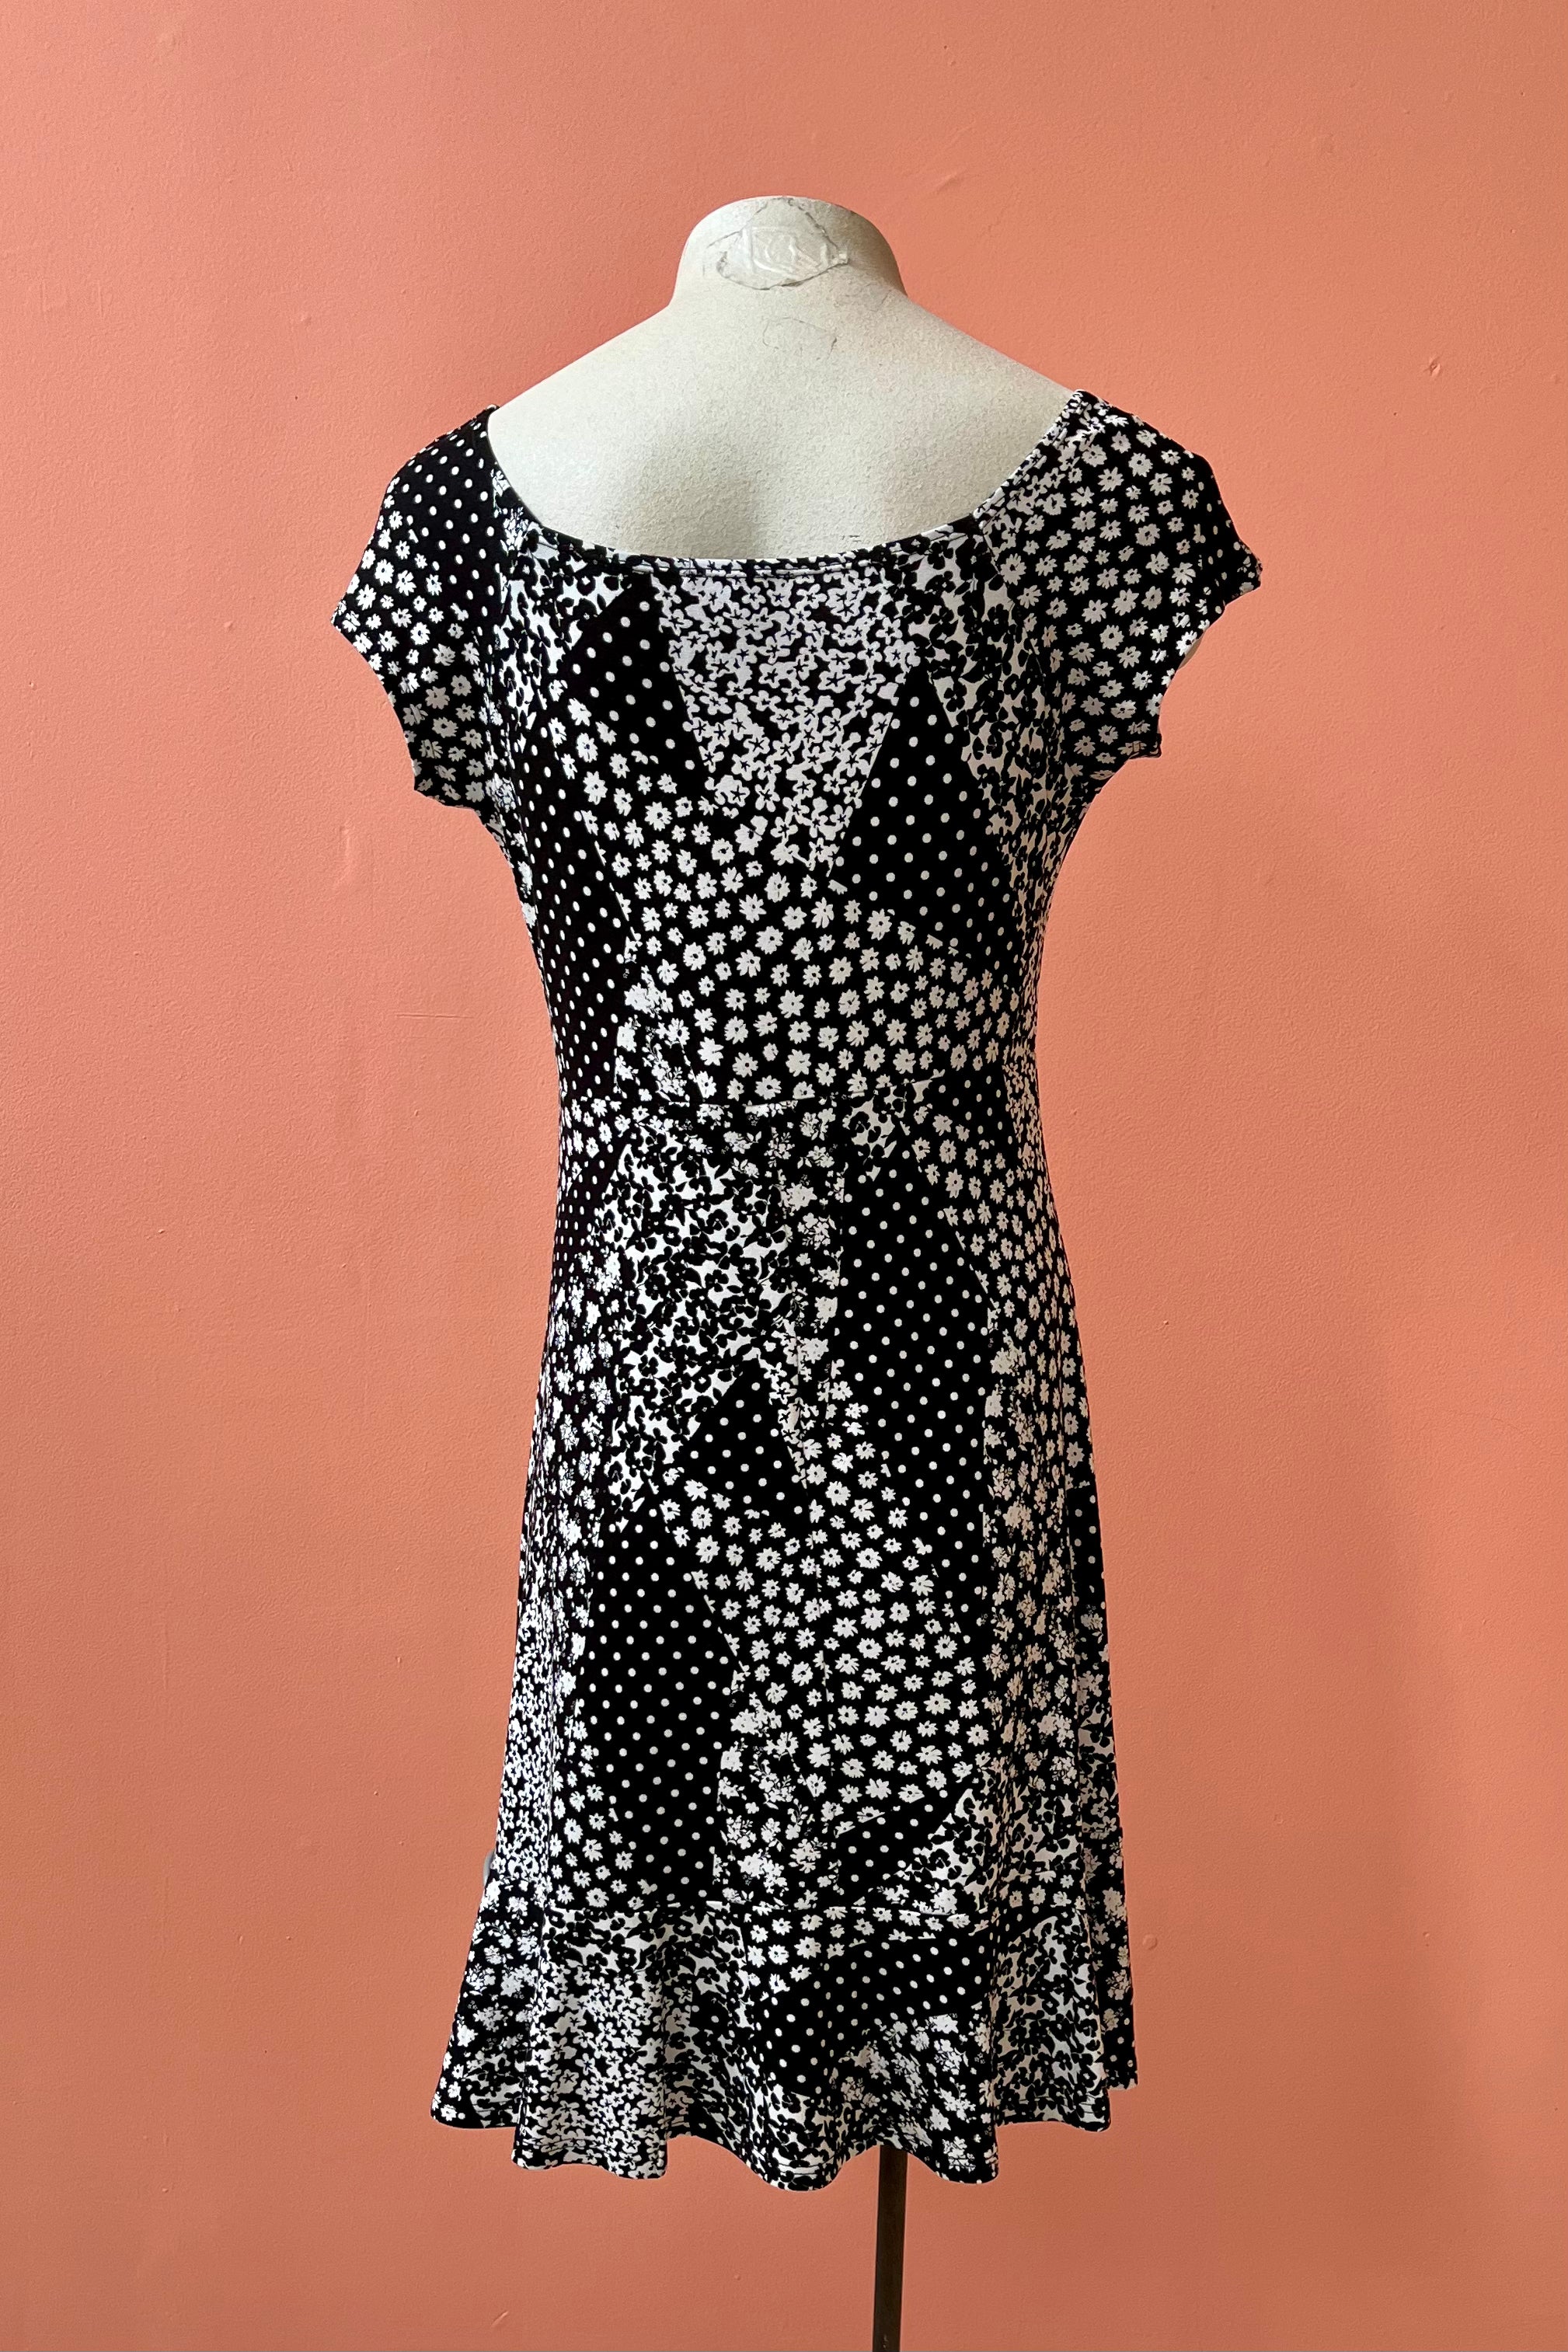 Lolita Dress by Luc Fontaine, back view, black and white floral patchwork print, sweetheart neckline, cap sleeves, fit and flare shape, ruffled hem, sizes sizes 4-16, made in Montreal